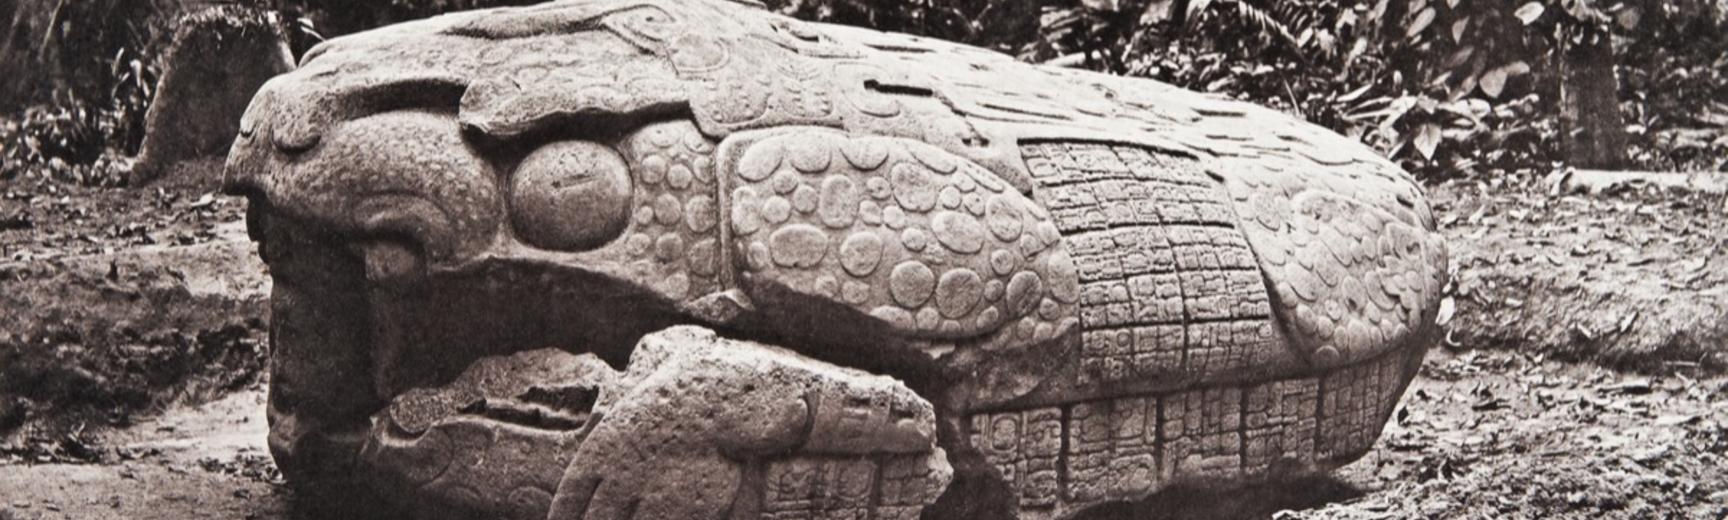 Zoomorph G (also known as Monument 7), west side, dated AD 785. The monument is now understood by scholars to represent a ‘Waterlily Jaguar’, with human figures wearing headdresses emerging from both ends. It was created during the first year of the reign